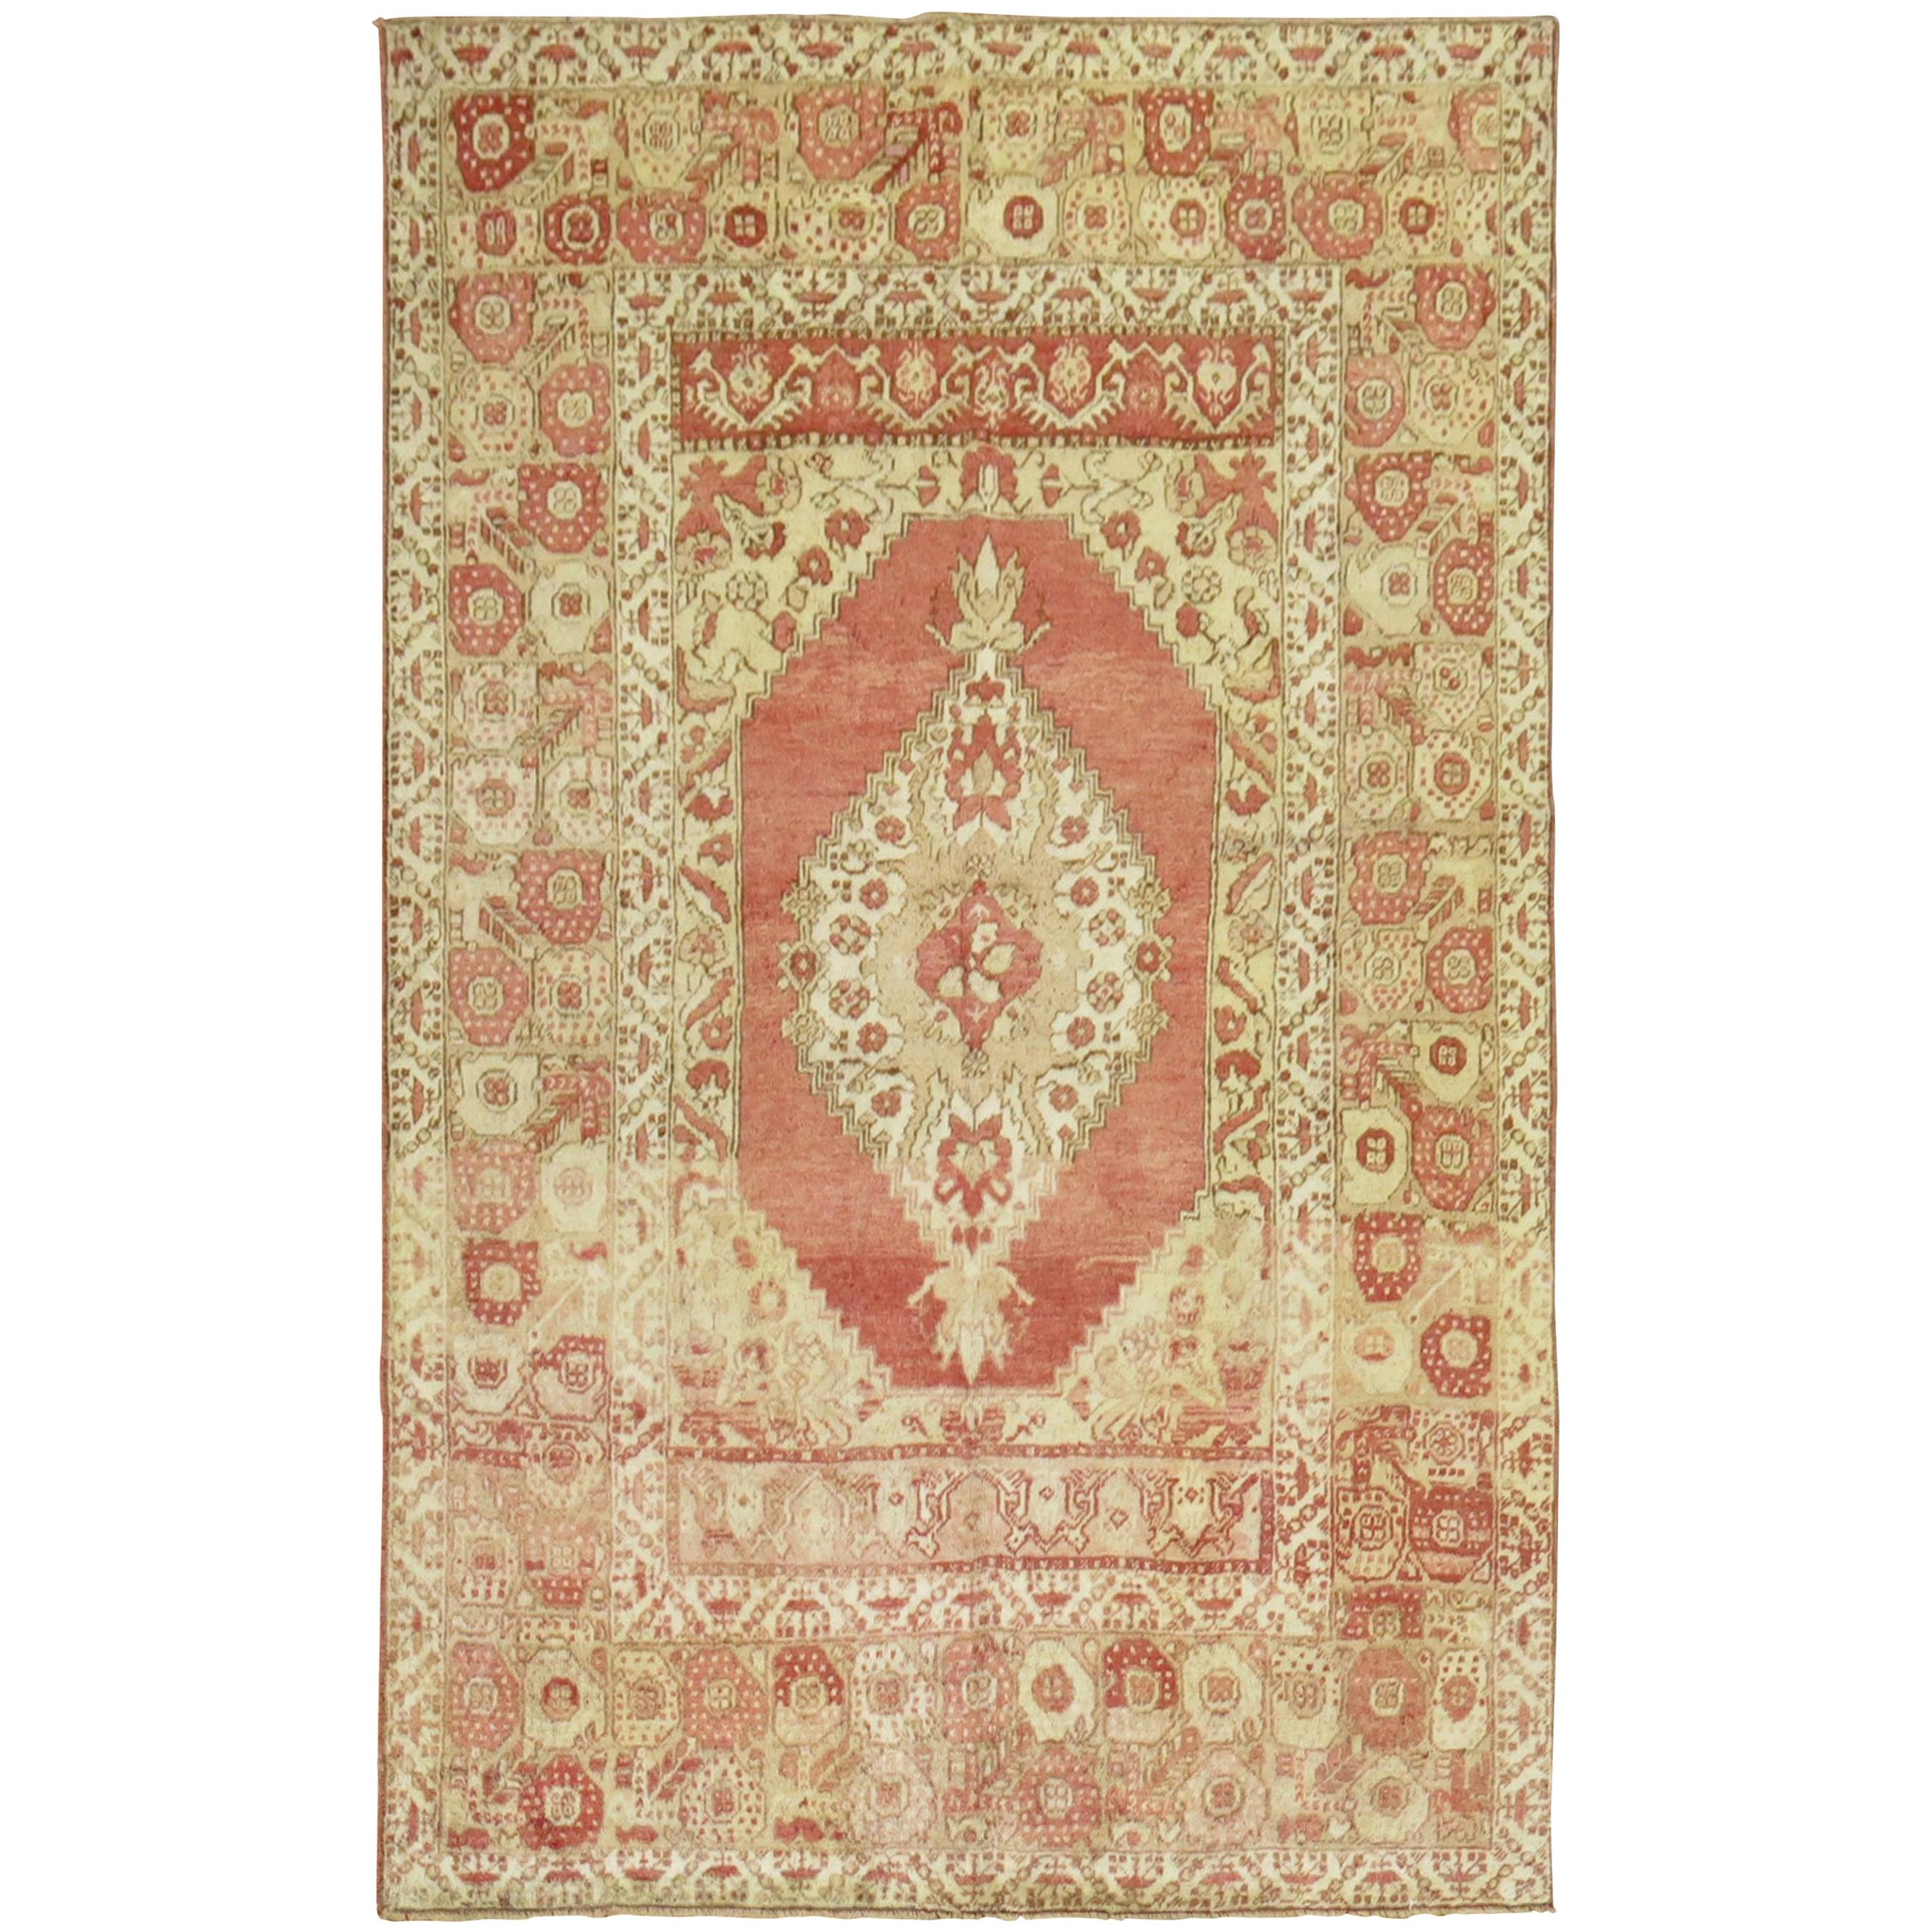 Antique Turkish Oushak Rug Melon Red Brown Accent 20th Century Rug For Sale